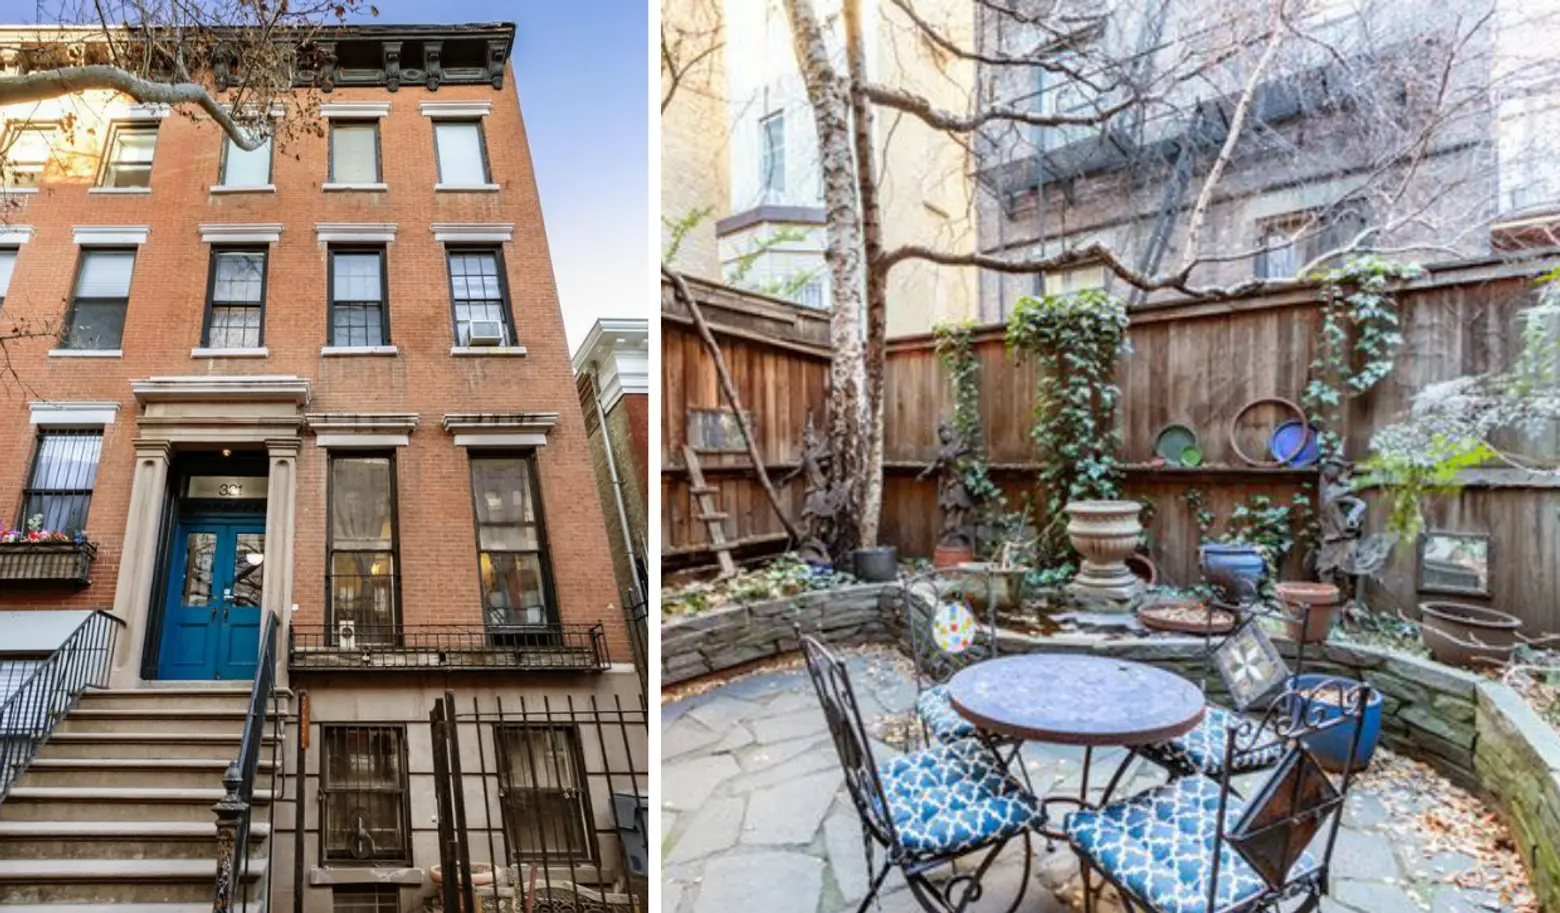 East Village rowhouse once home to Andy Warhol and Paul Morrissey lists for $5M